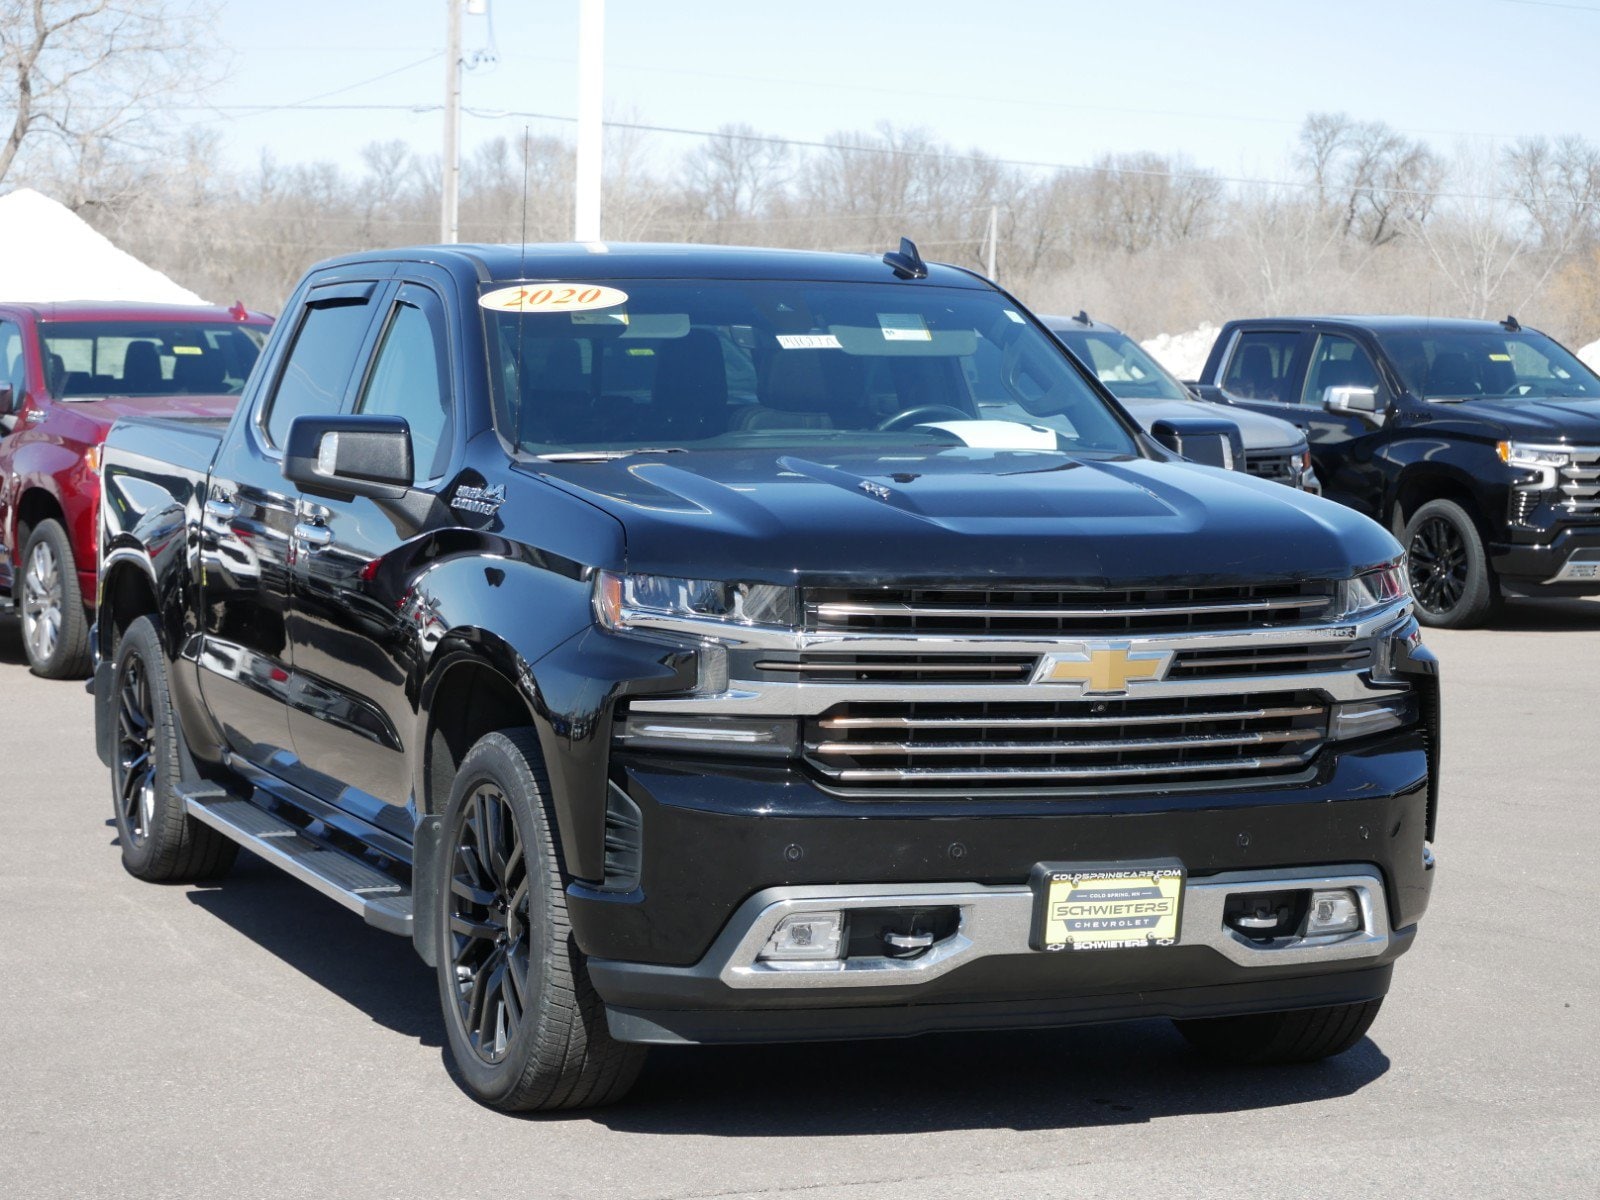 Used 2020 Chevrolet Silverado 1500 High Country with VIN 1GCUYHEL9LZ308683 for sale in Cold Spring, Minnesota